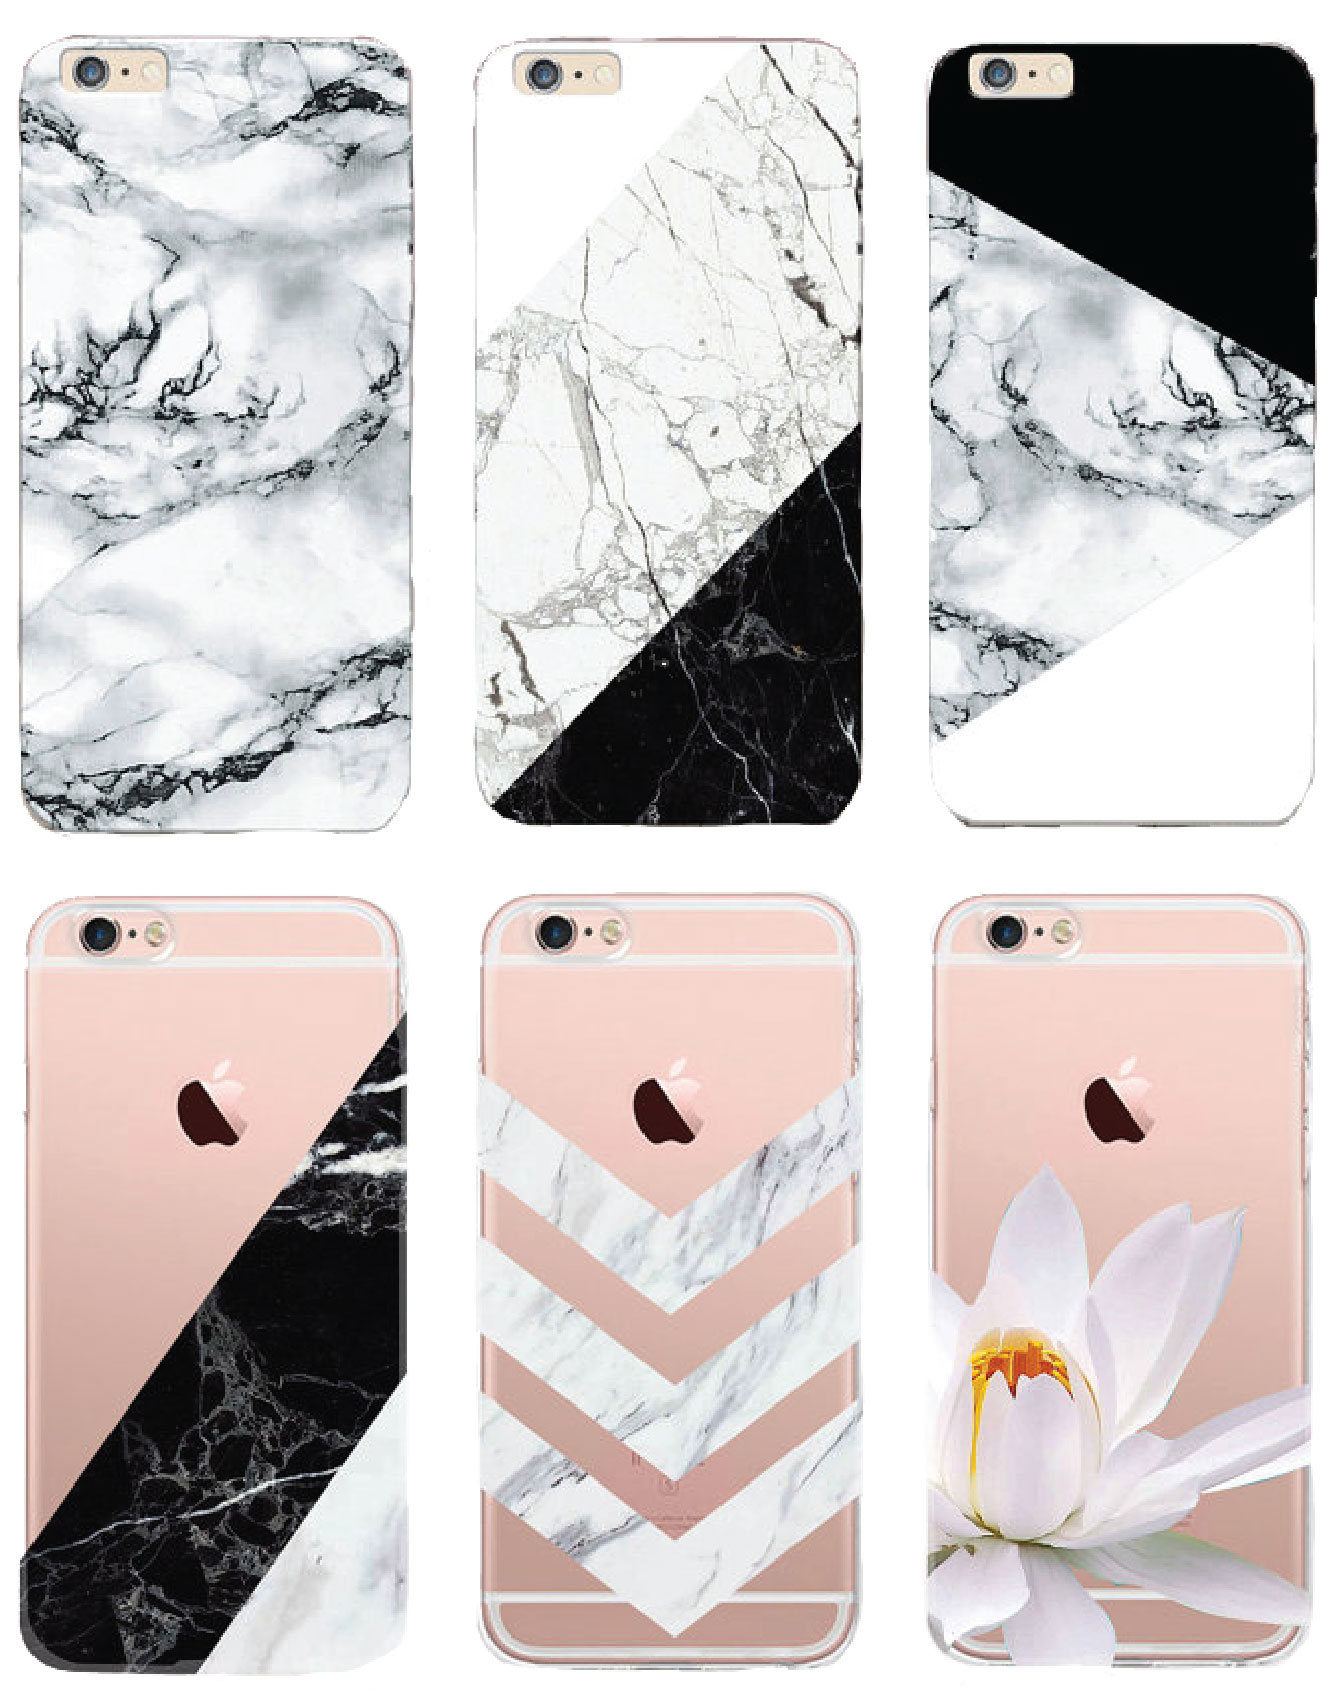 marble iphone cases, transparent iphone cases, etsy shops, etsy finds, handmade, tech accessories, monochrome, white marble, black marble, catching raindbows, CR Cases